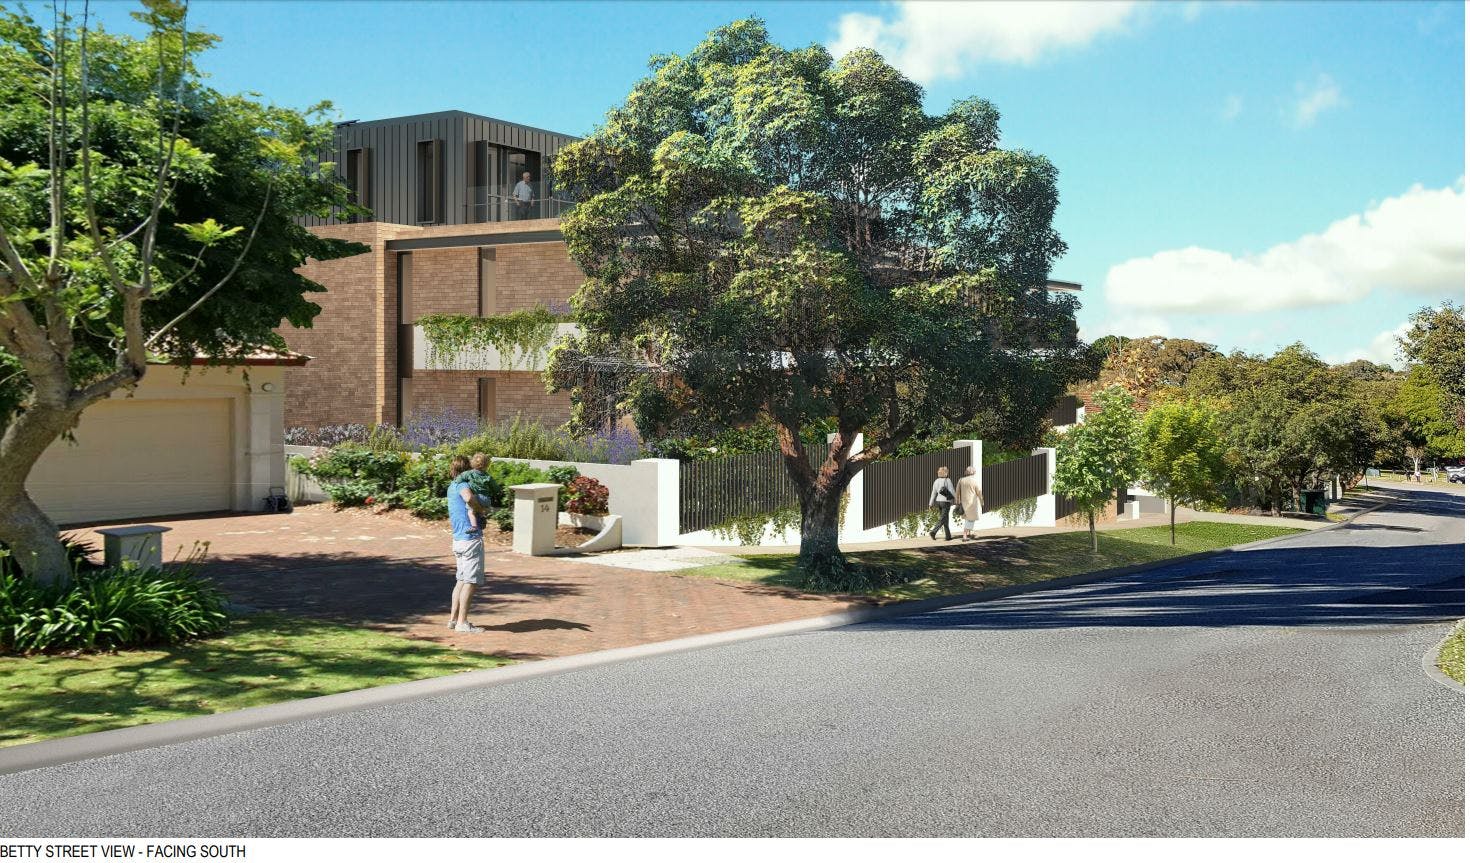 Betty Street View - Facing South Render - Residential Aged Care Facility